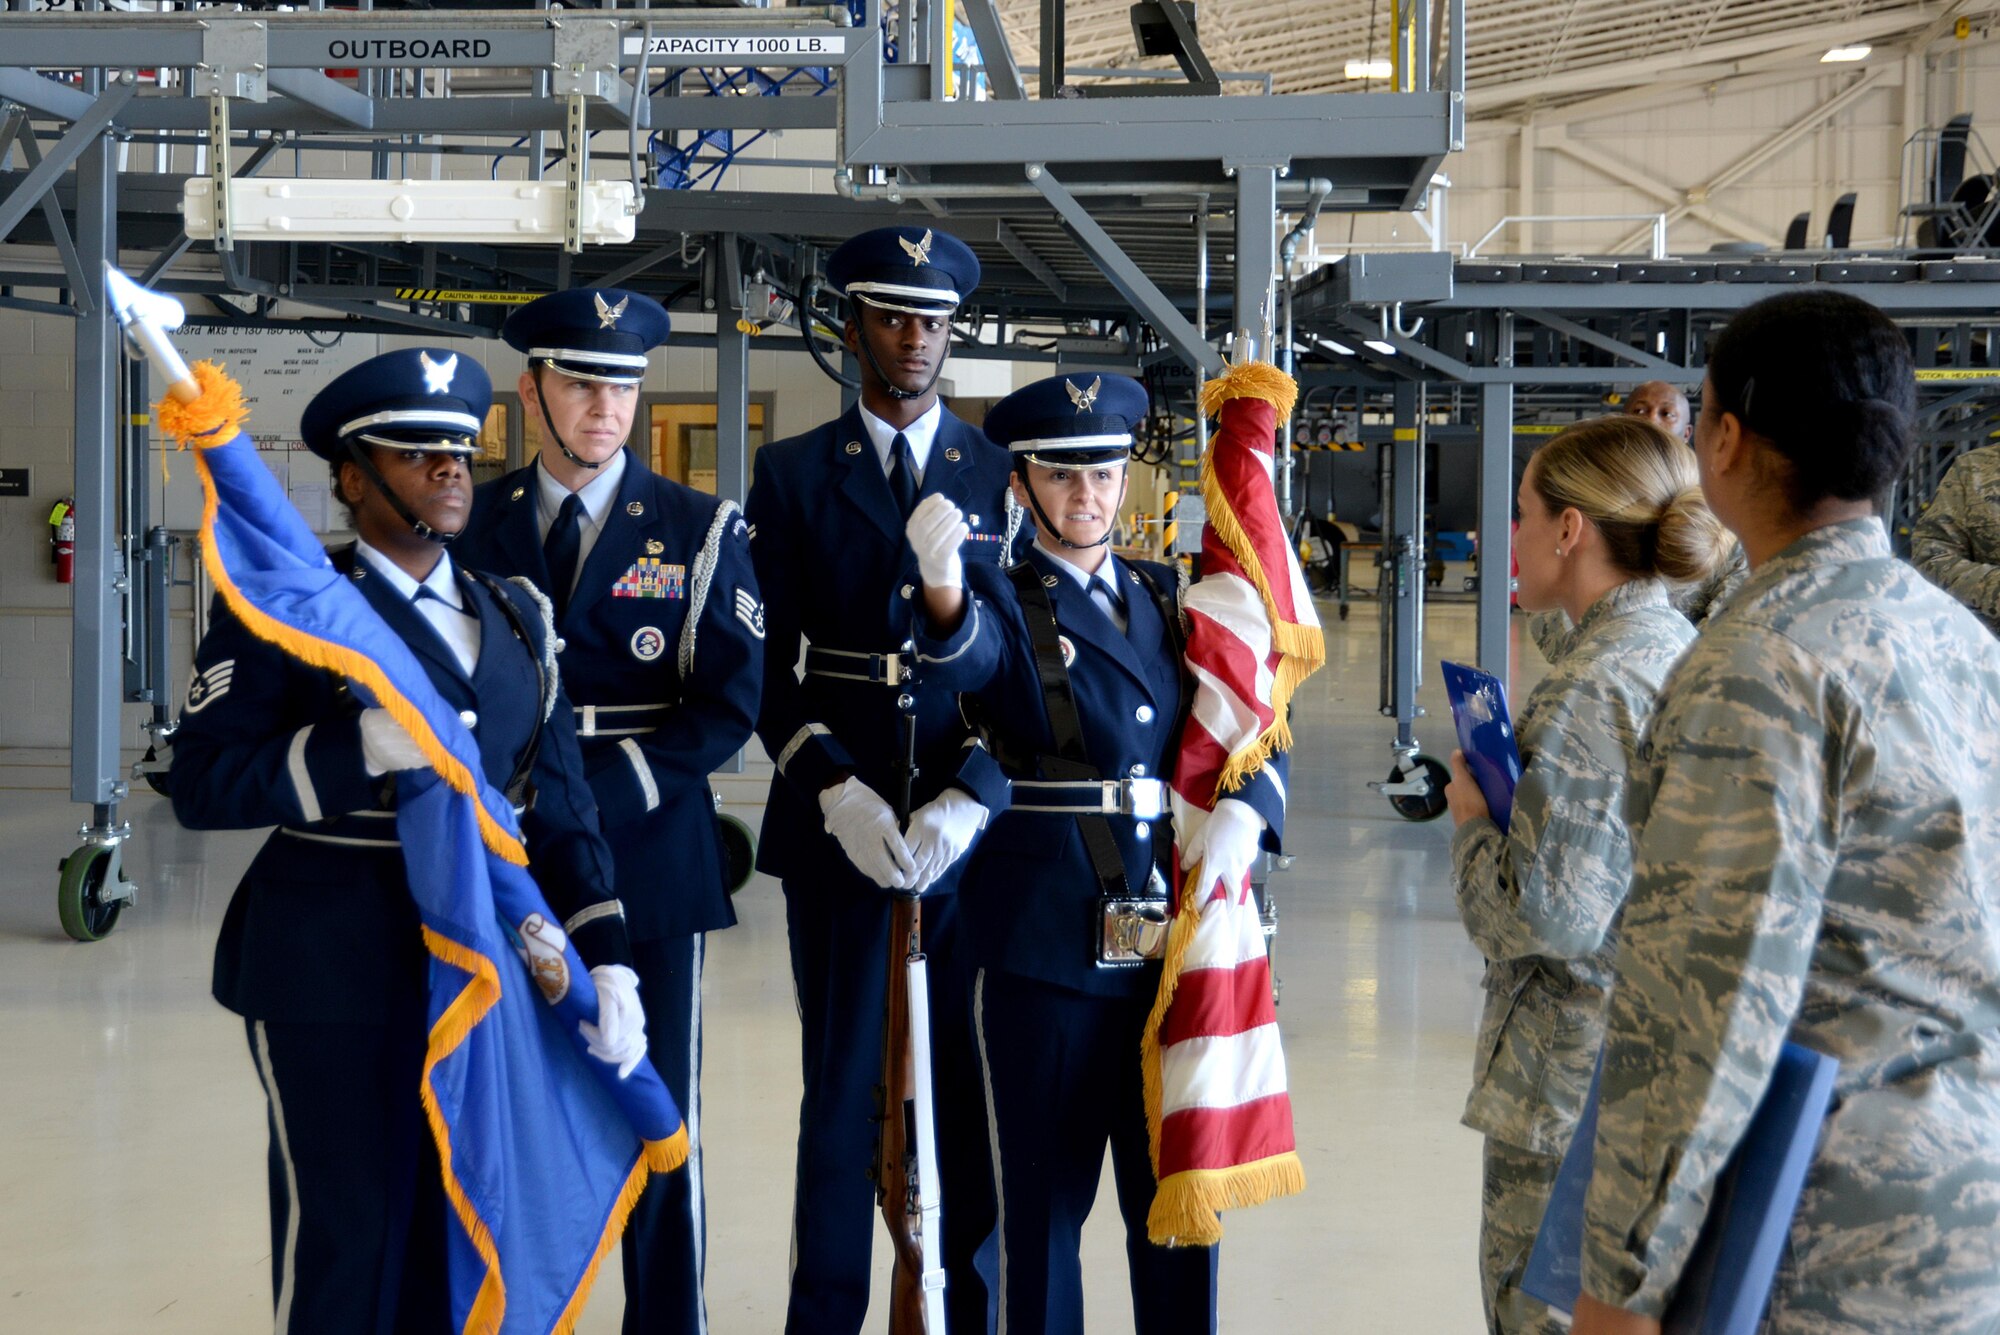 Keesler Air Force Base Honor Guardsmen clarify their marching route for the 22nd Air Force change of command ceremony with 81st Training Wing Protocol Office members in the isochronal dock Nov. 14, 2017, on Keesler Air Force Base, Mississippi. The Protocol Office is in charge of ensuring every ceremony on Keesler goes to plan according to Air Force standards. (U.S. Air Force photo by Airman 1st Class Suzanna Plotnikov)